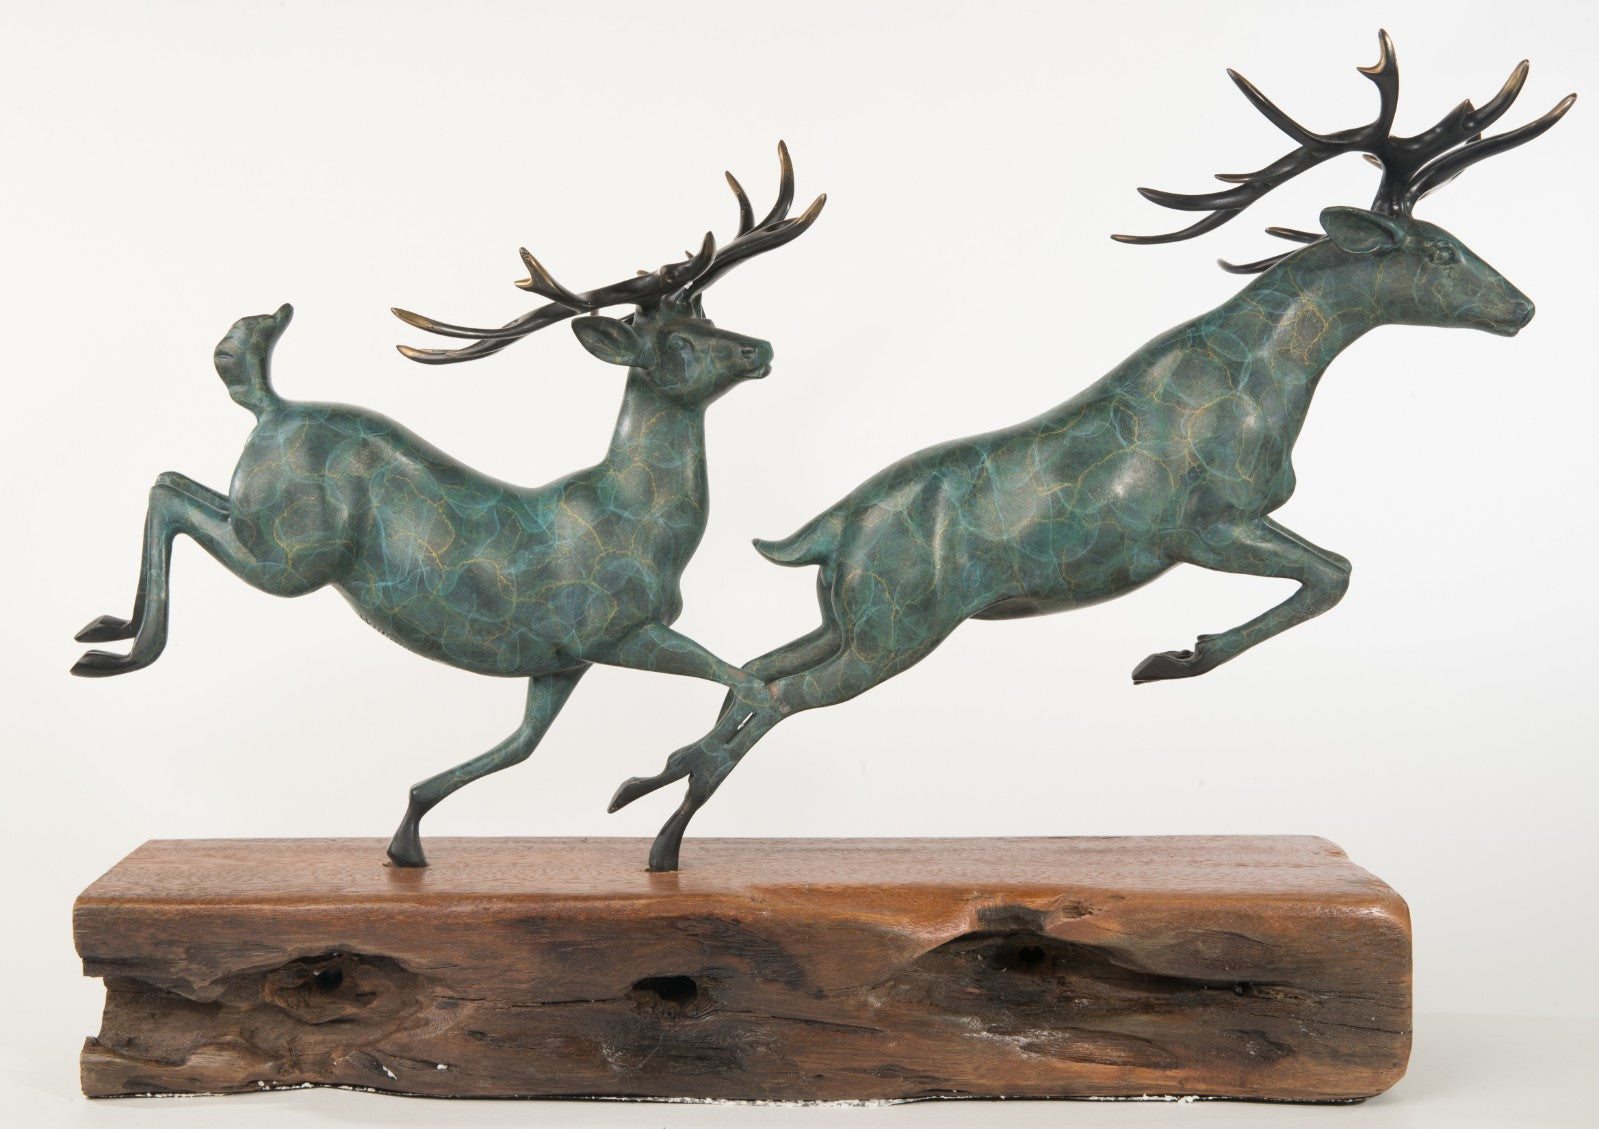 AWESOME BRONZE RUNNING ELKS SCULPTURE HOT CAST COLLECTOR Wood BASE FIGURINE SALE GIFT